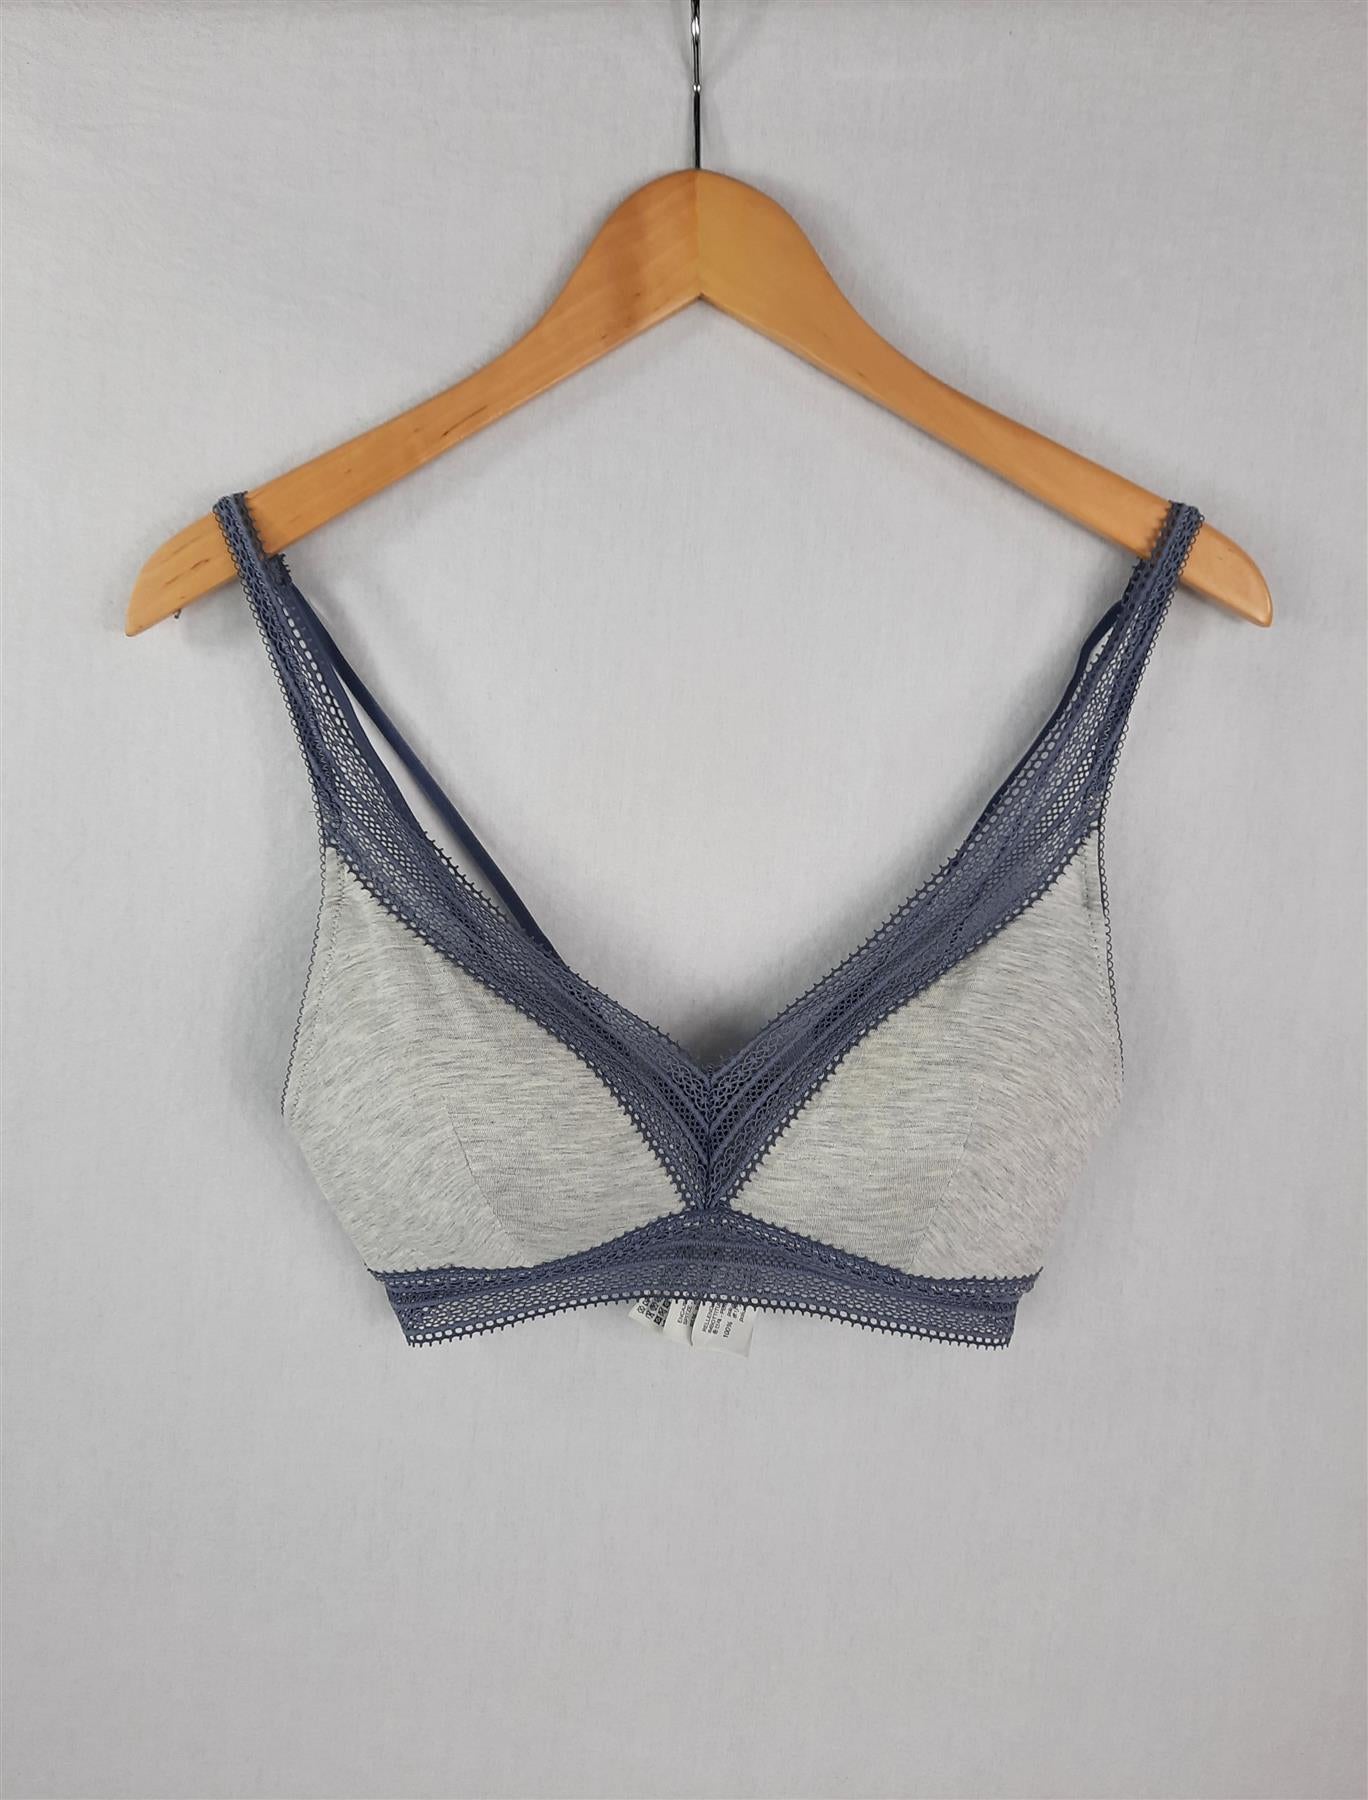 Women's Non-Wired Triangle Bras Lace Trim Padded Modal Lined Brand New